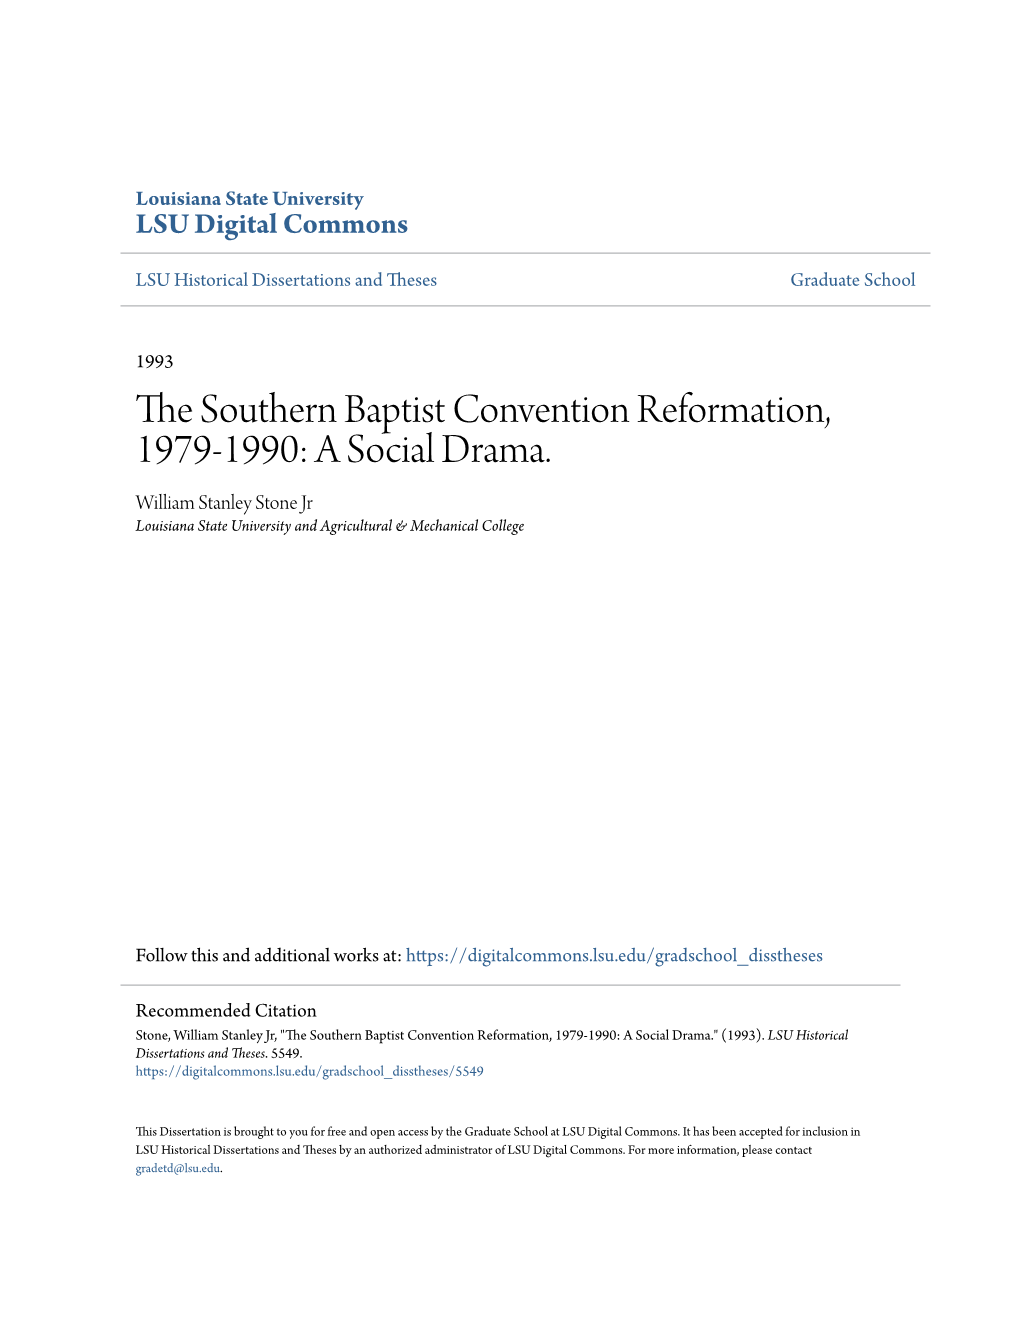 The Southern Baptist Convention Reformation, 1979-1990: a Social Drama